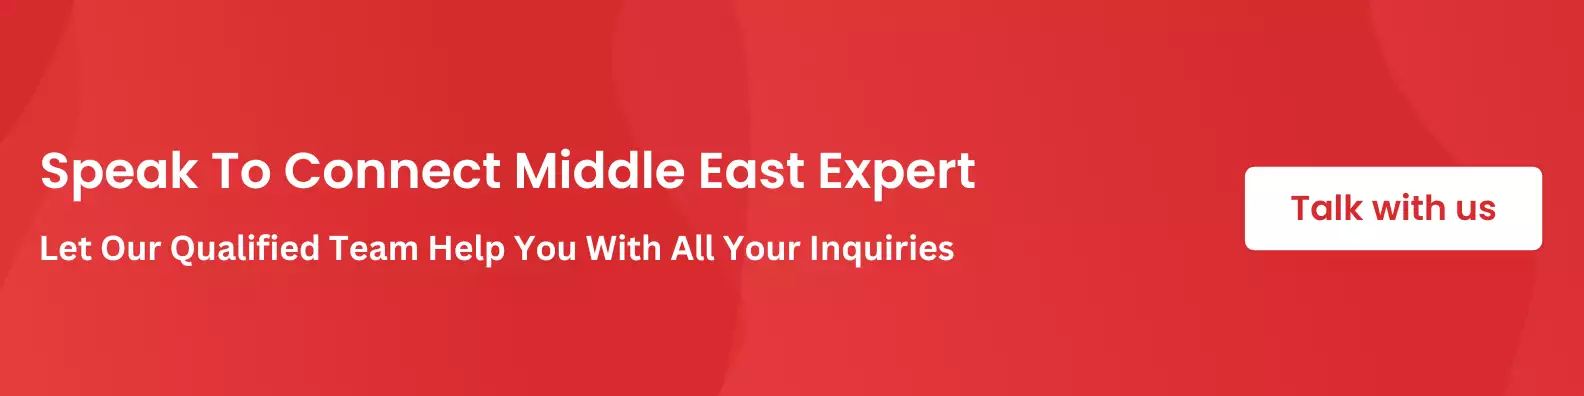 connect-middle-east